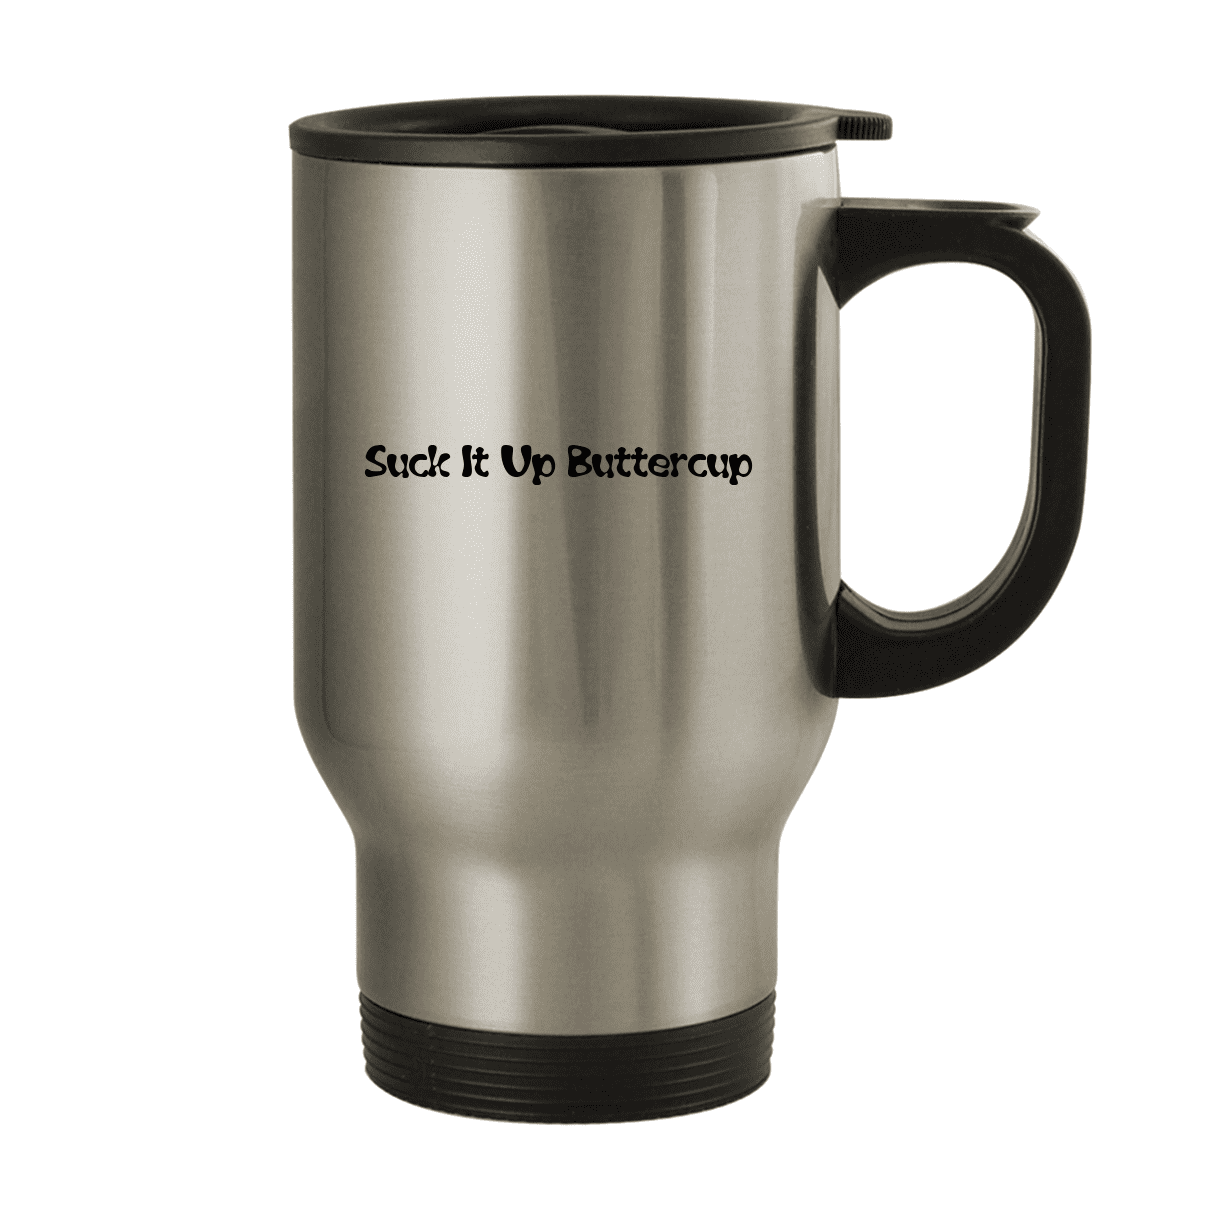 Suck It Up Buttercup Sports Exercise Fitness Gym Funny Ceramic White Coffee Mug 